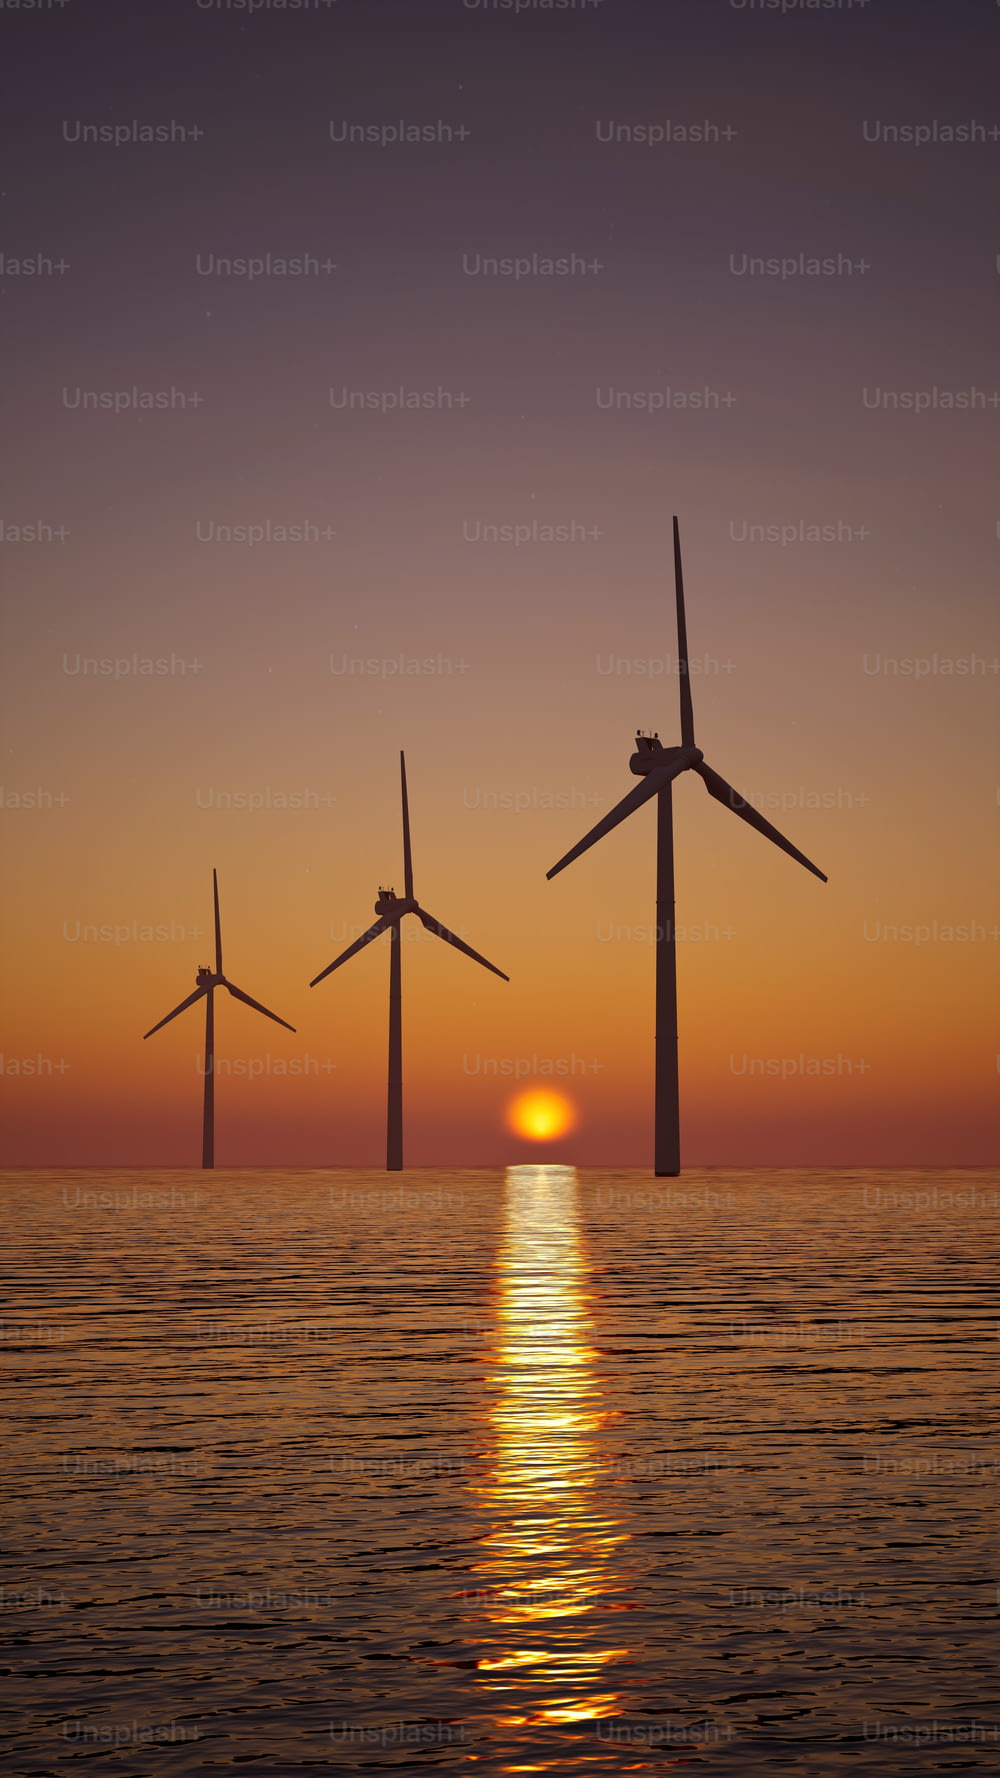 a group of windmills floating in the ocean at sunset